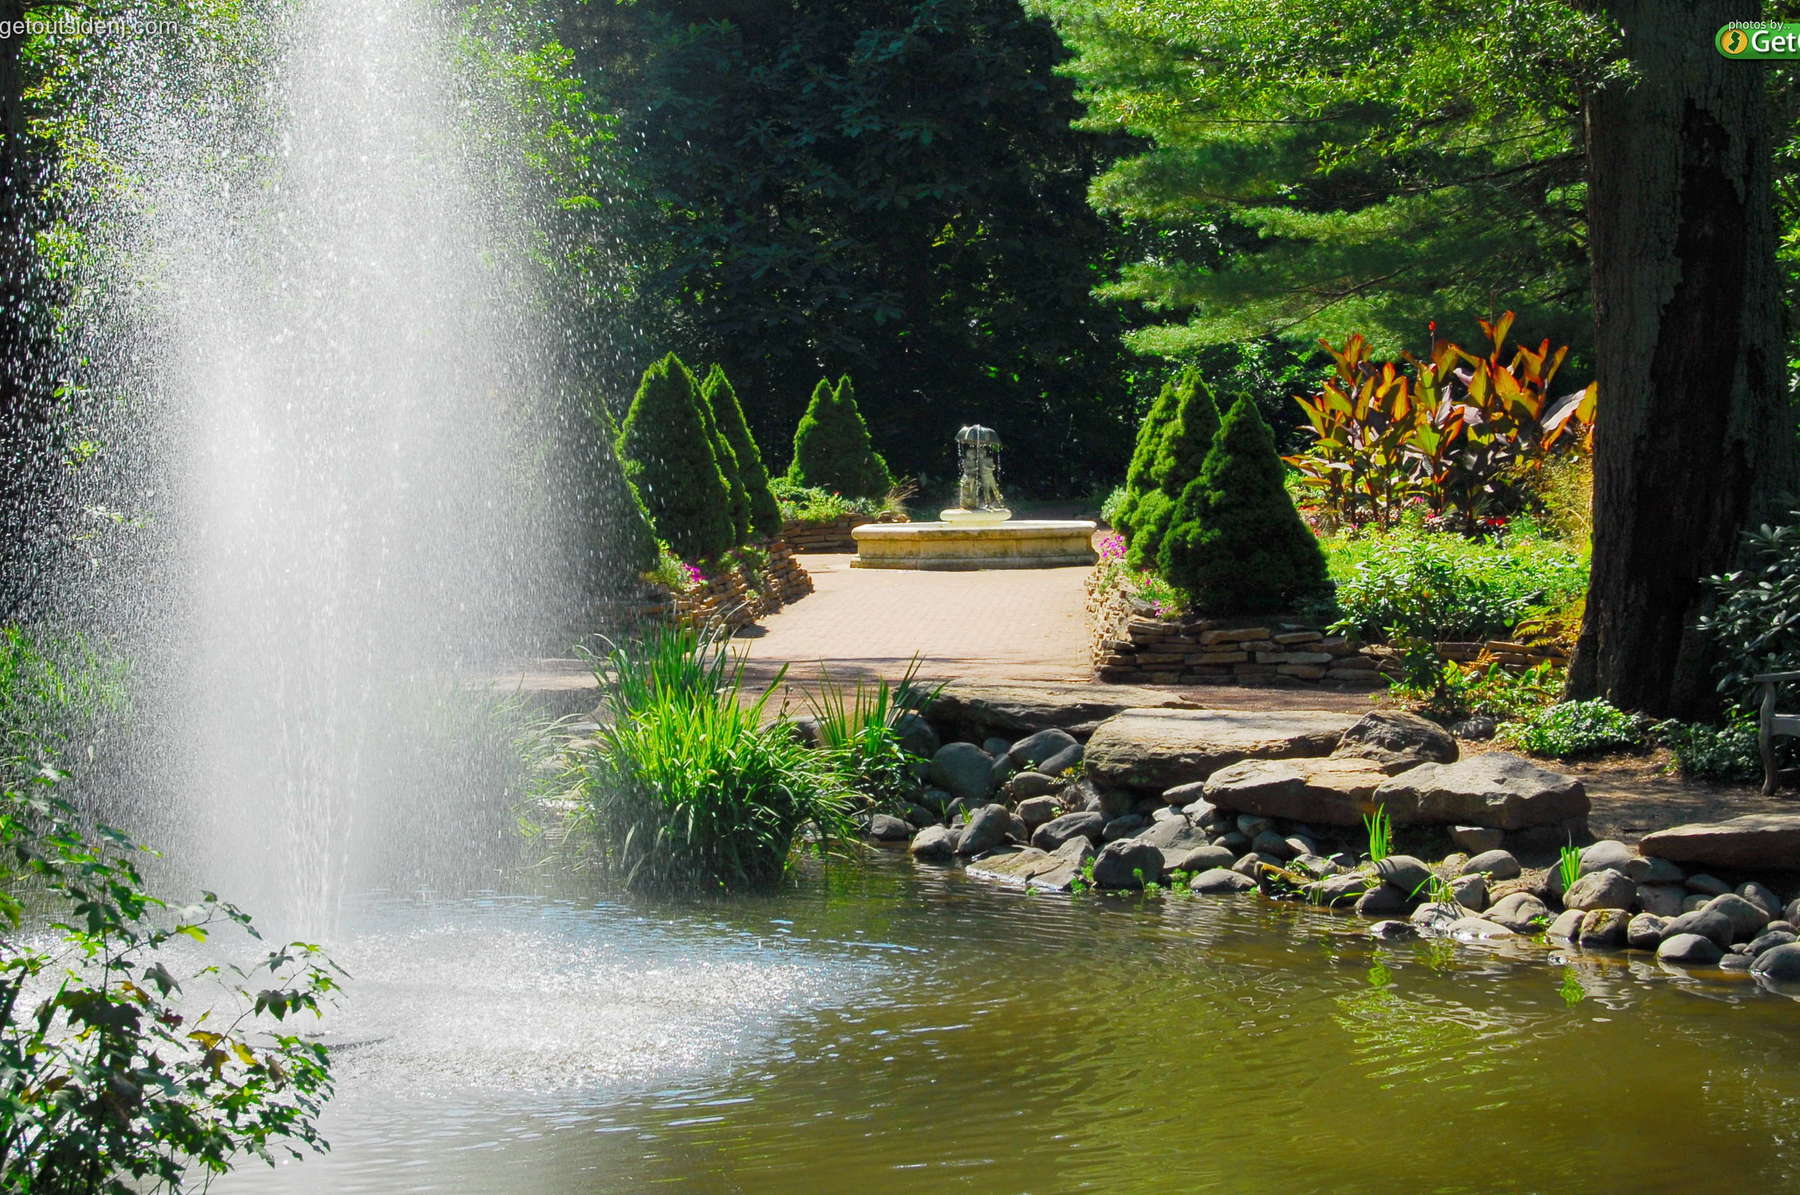 A large fountain sprays water over a flower bed. A path behind the flowers leads up to a sculpture.